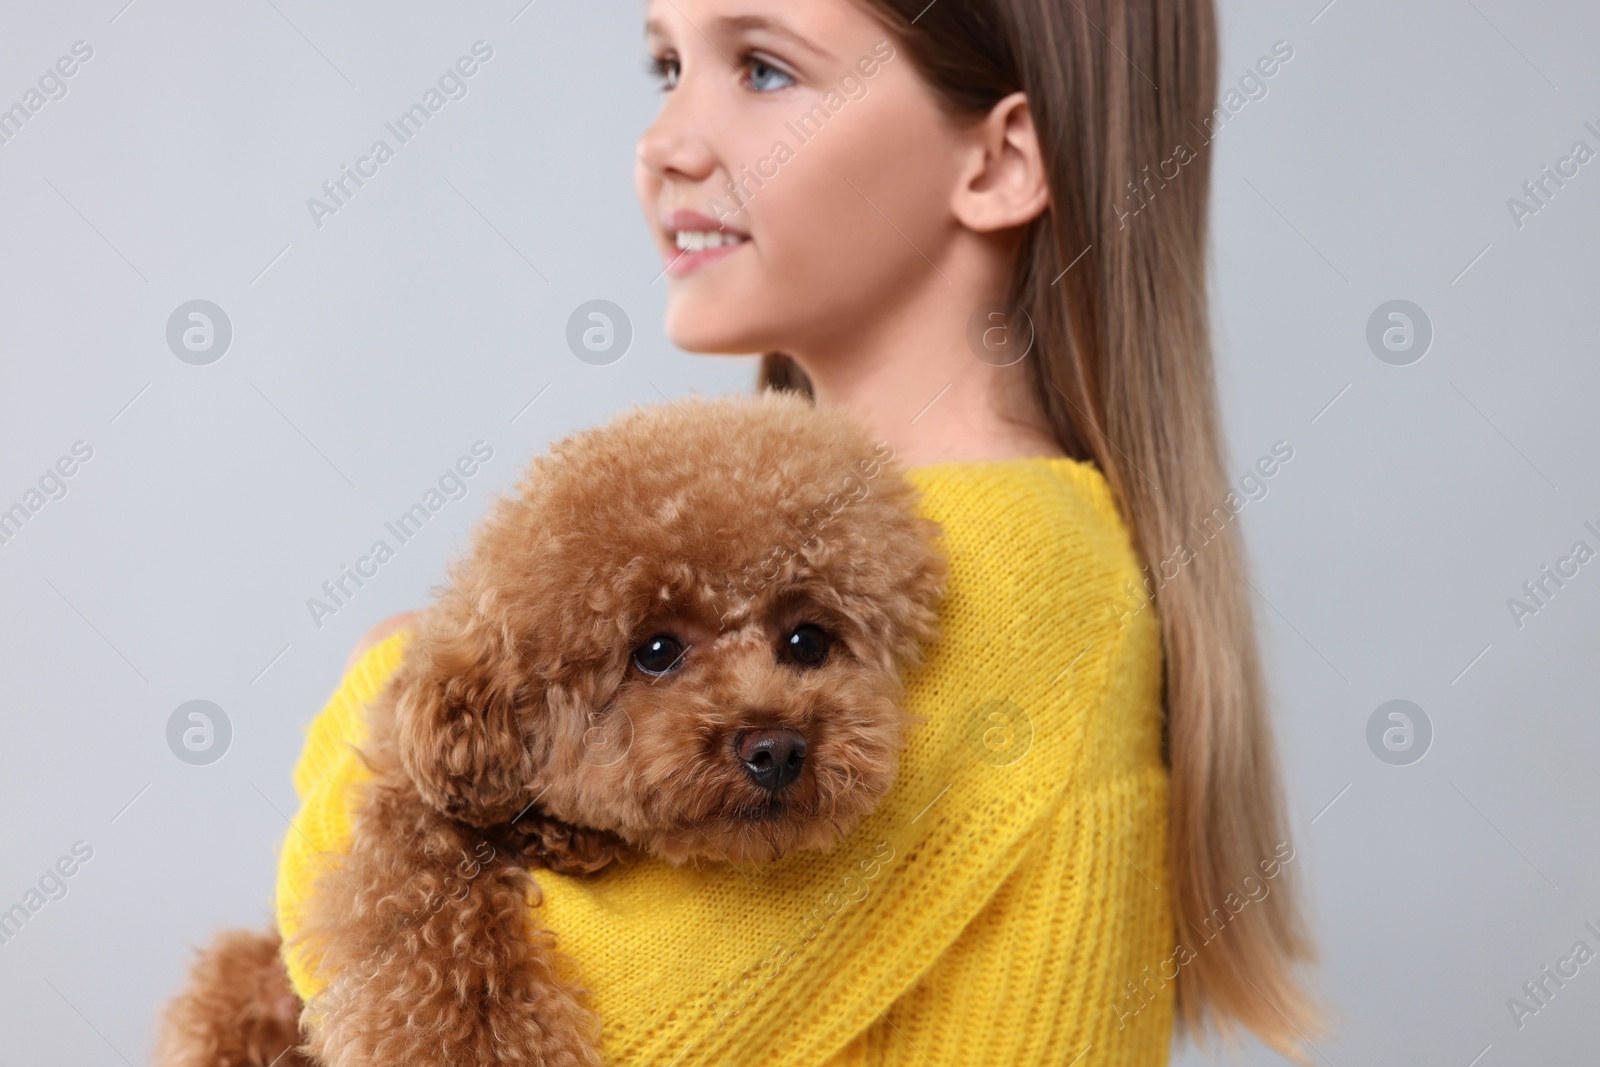 Photo of Little child with cute puppy on light grey background. Lovely pet